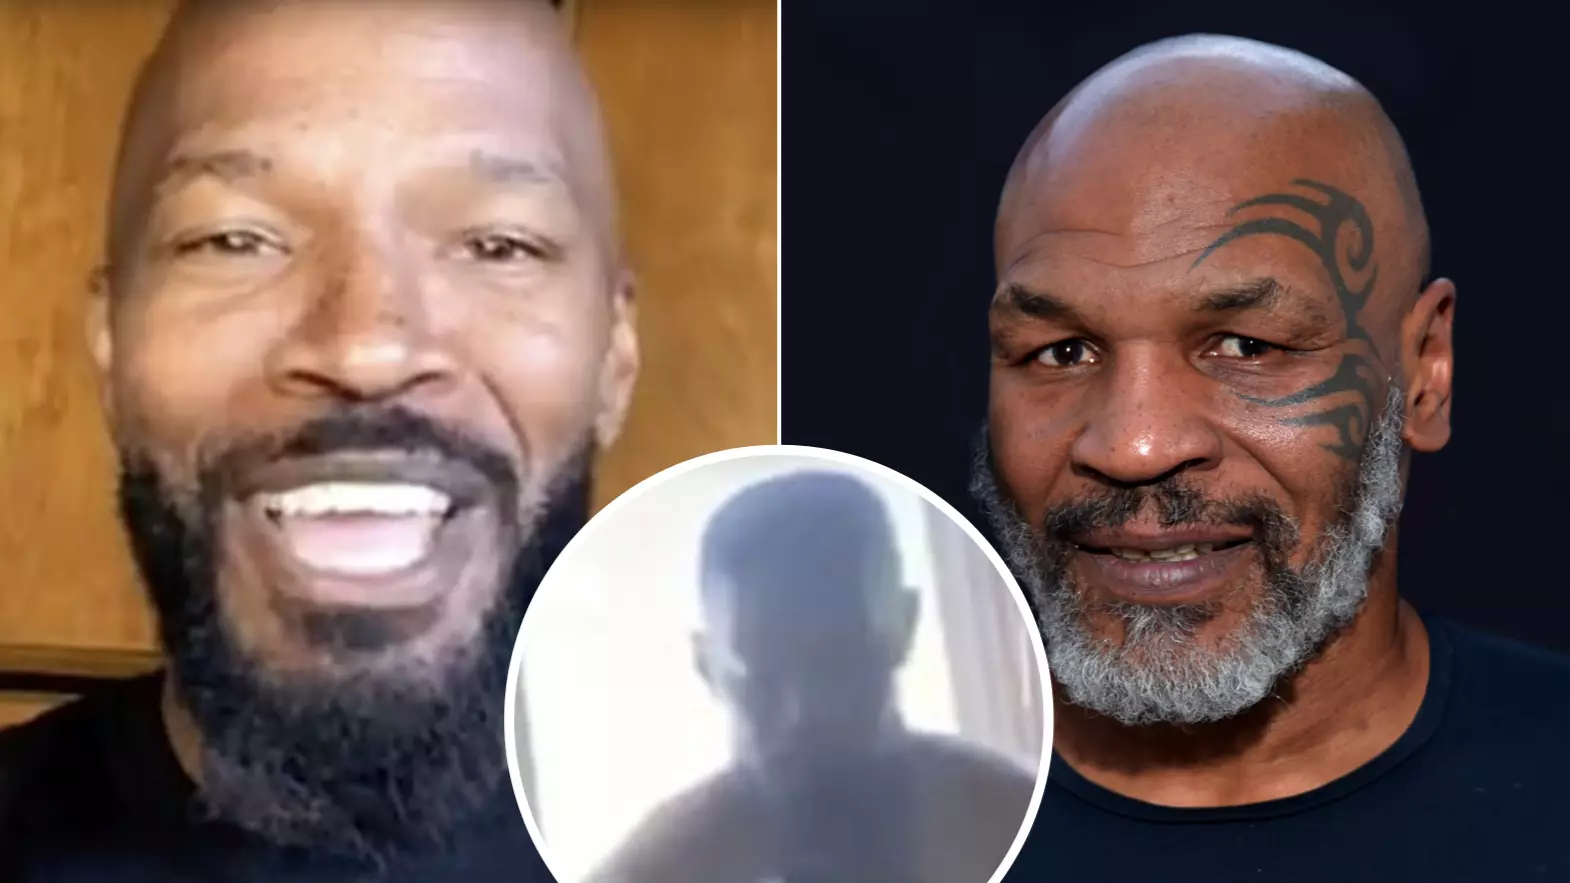 Jamie Foxx Is Looking Seriously Jacked As He Prepares To Play Mike Tyson In Biopic